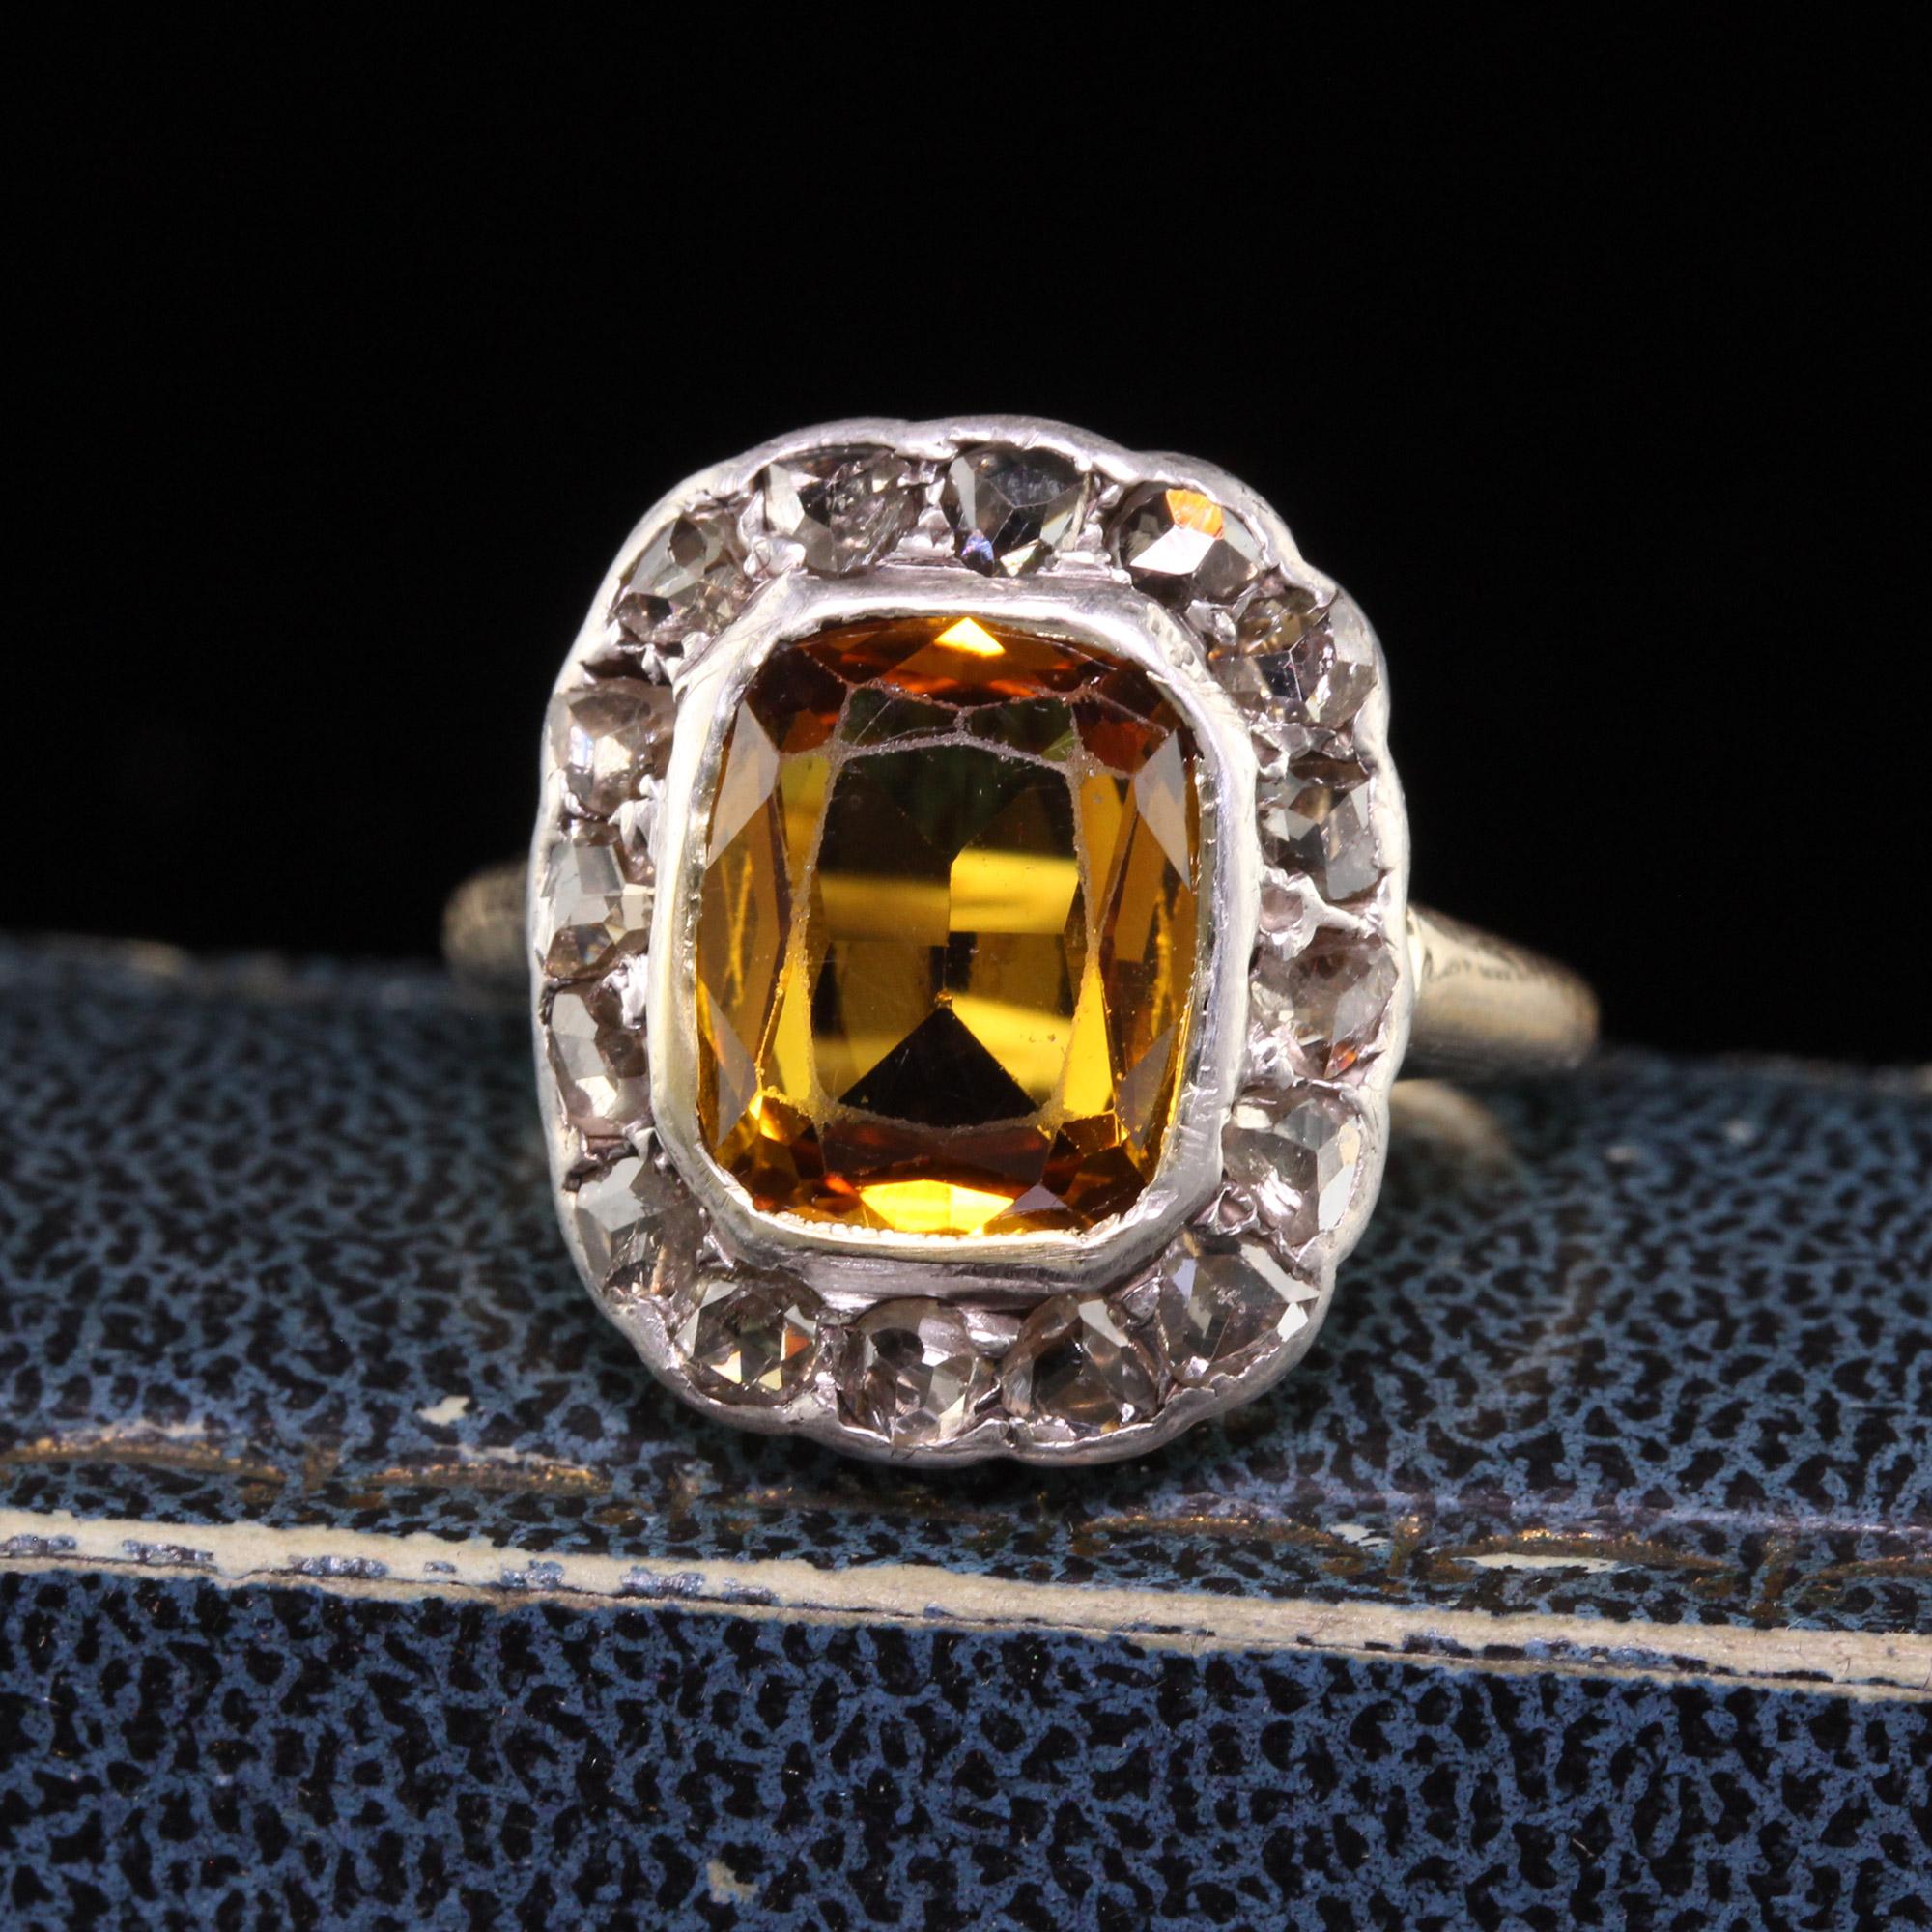 Beautiful Antique Victorian 14K Yellow Gold Silver Top Citrine Rose Cut Diamond Ring. This beautiful Victorian ring is crafted in 14k yellow gold and silver. The center holds an old cut citrine and is surrounded by rose cut diamonds set in silver